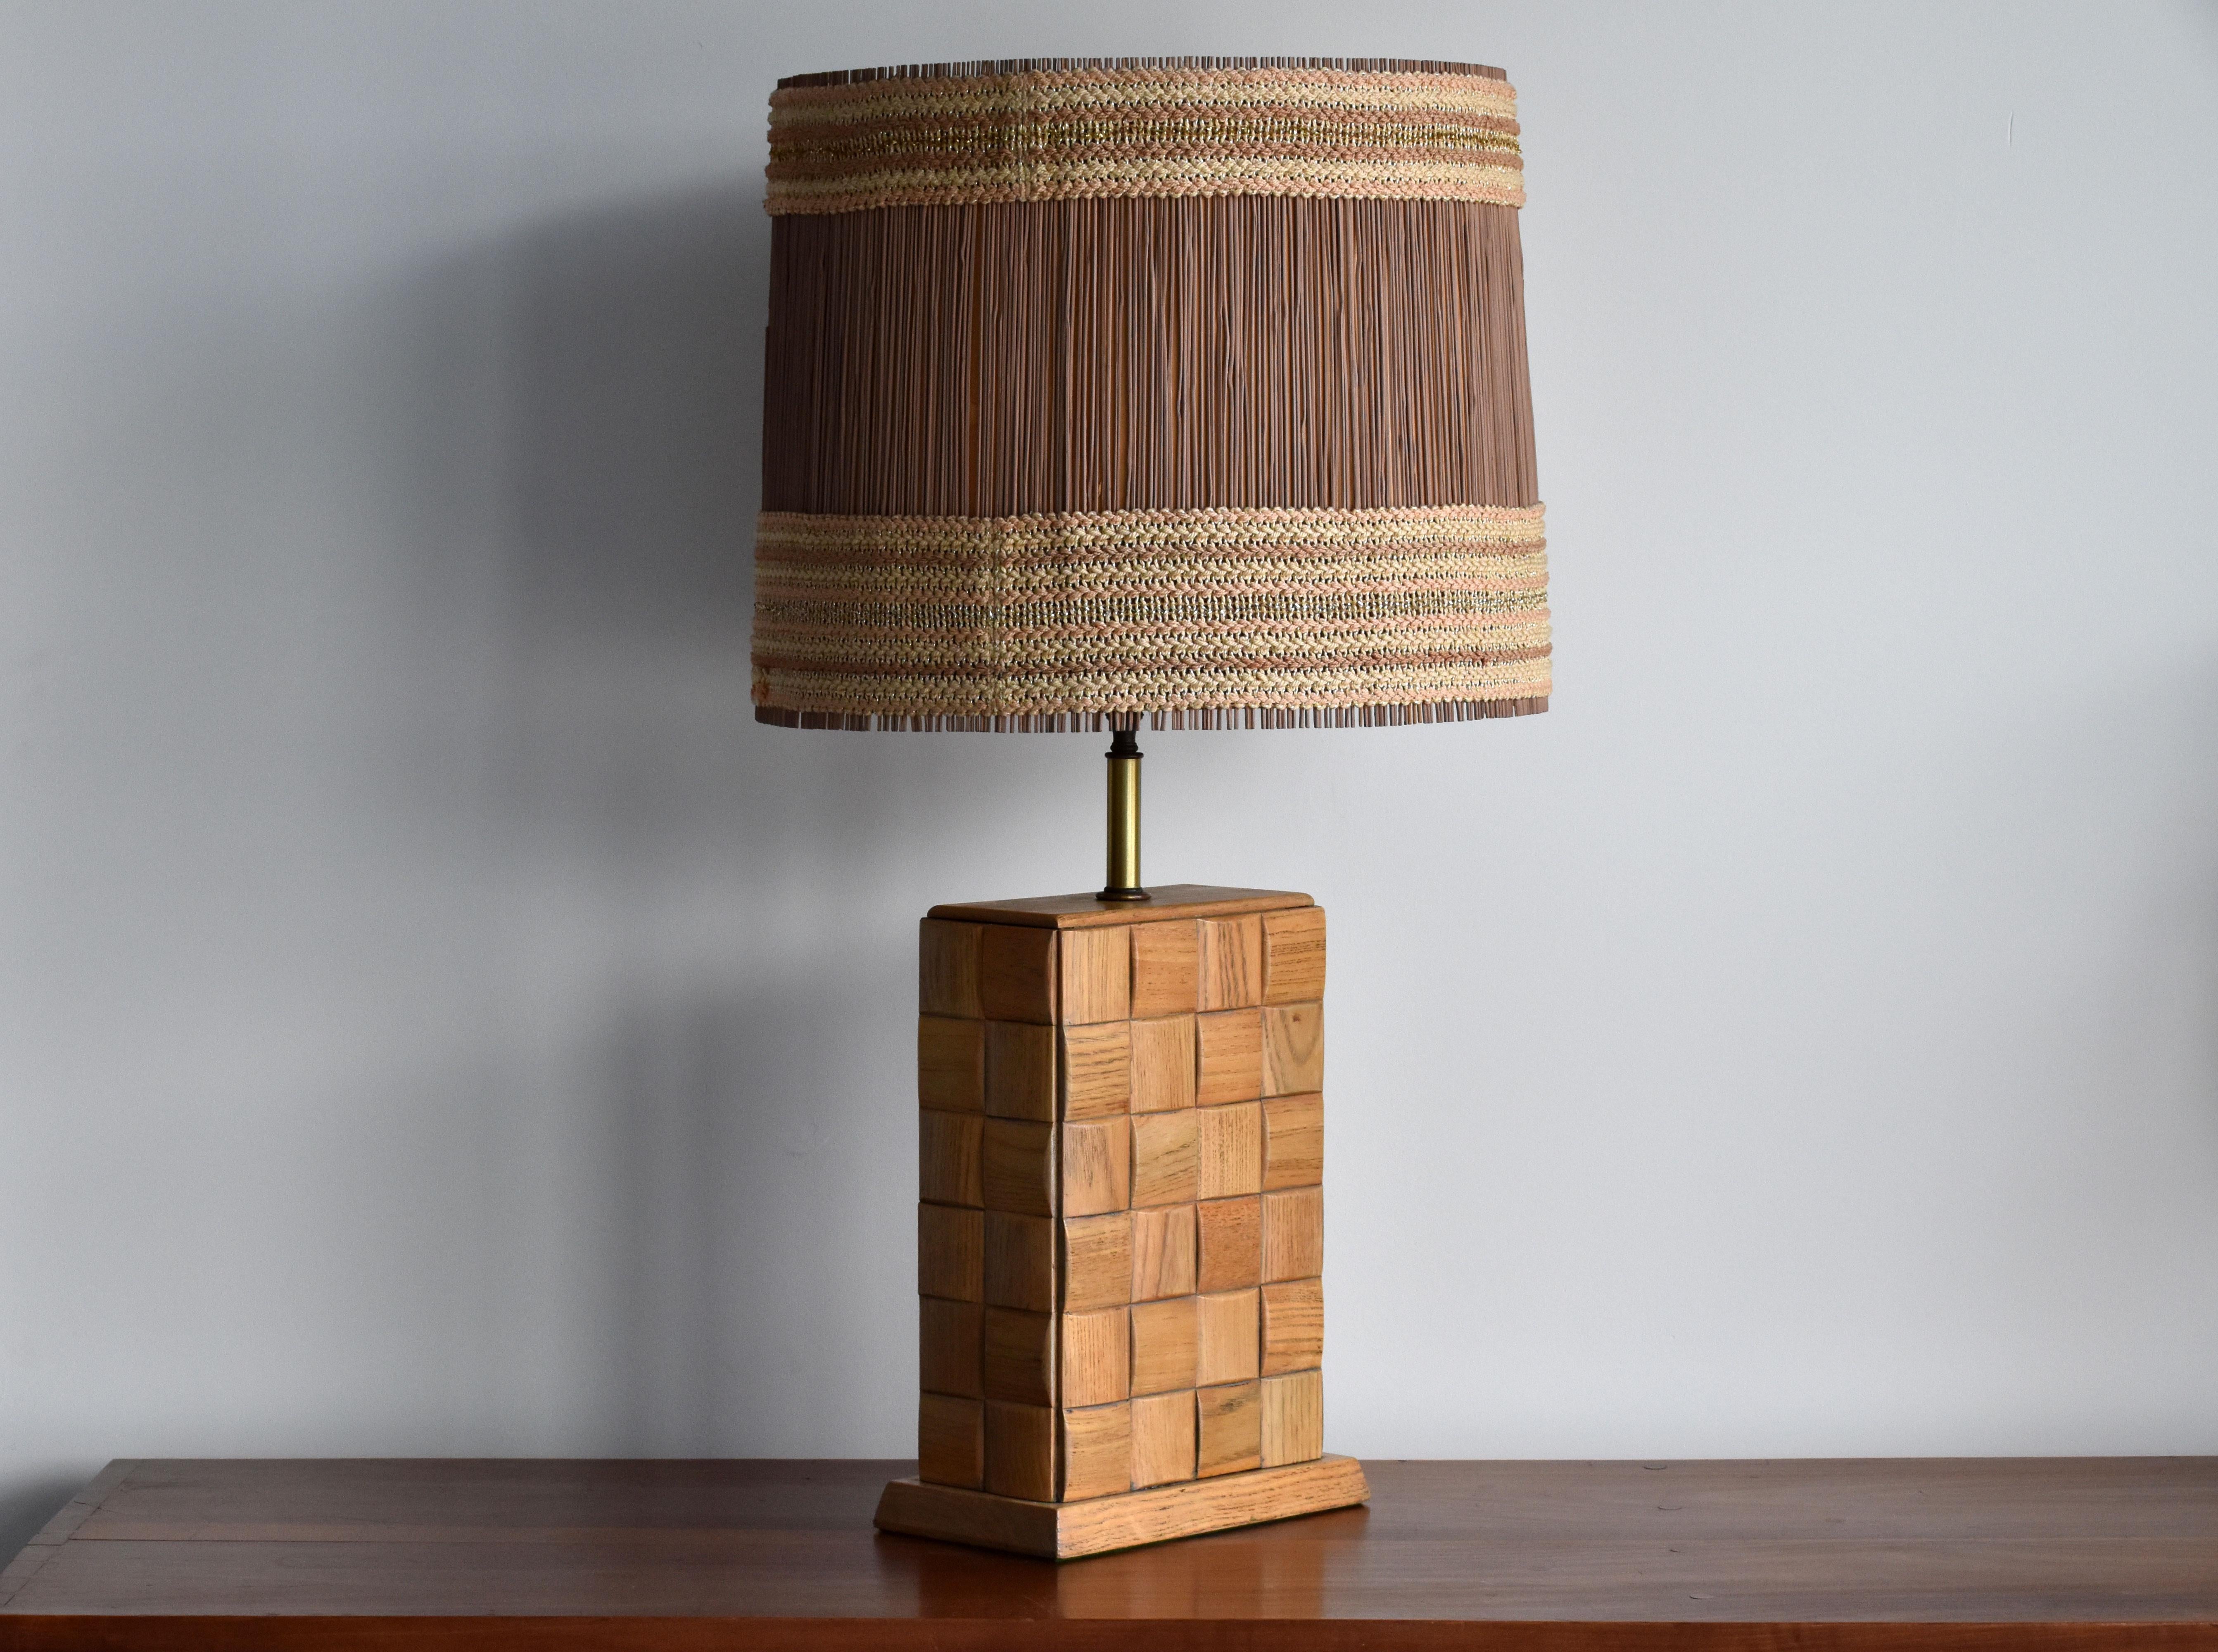 A large modernist table lamp by Paul Laszlo, fitted with a Maria Kipp shade (most likely secondary to lamp). It was produced by Brown Saltman. 

The base features Laszlo's iconic chess pattern that was incorporated in his designs for Brown Saltman.